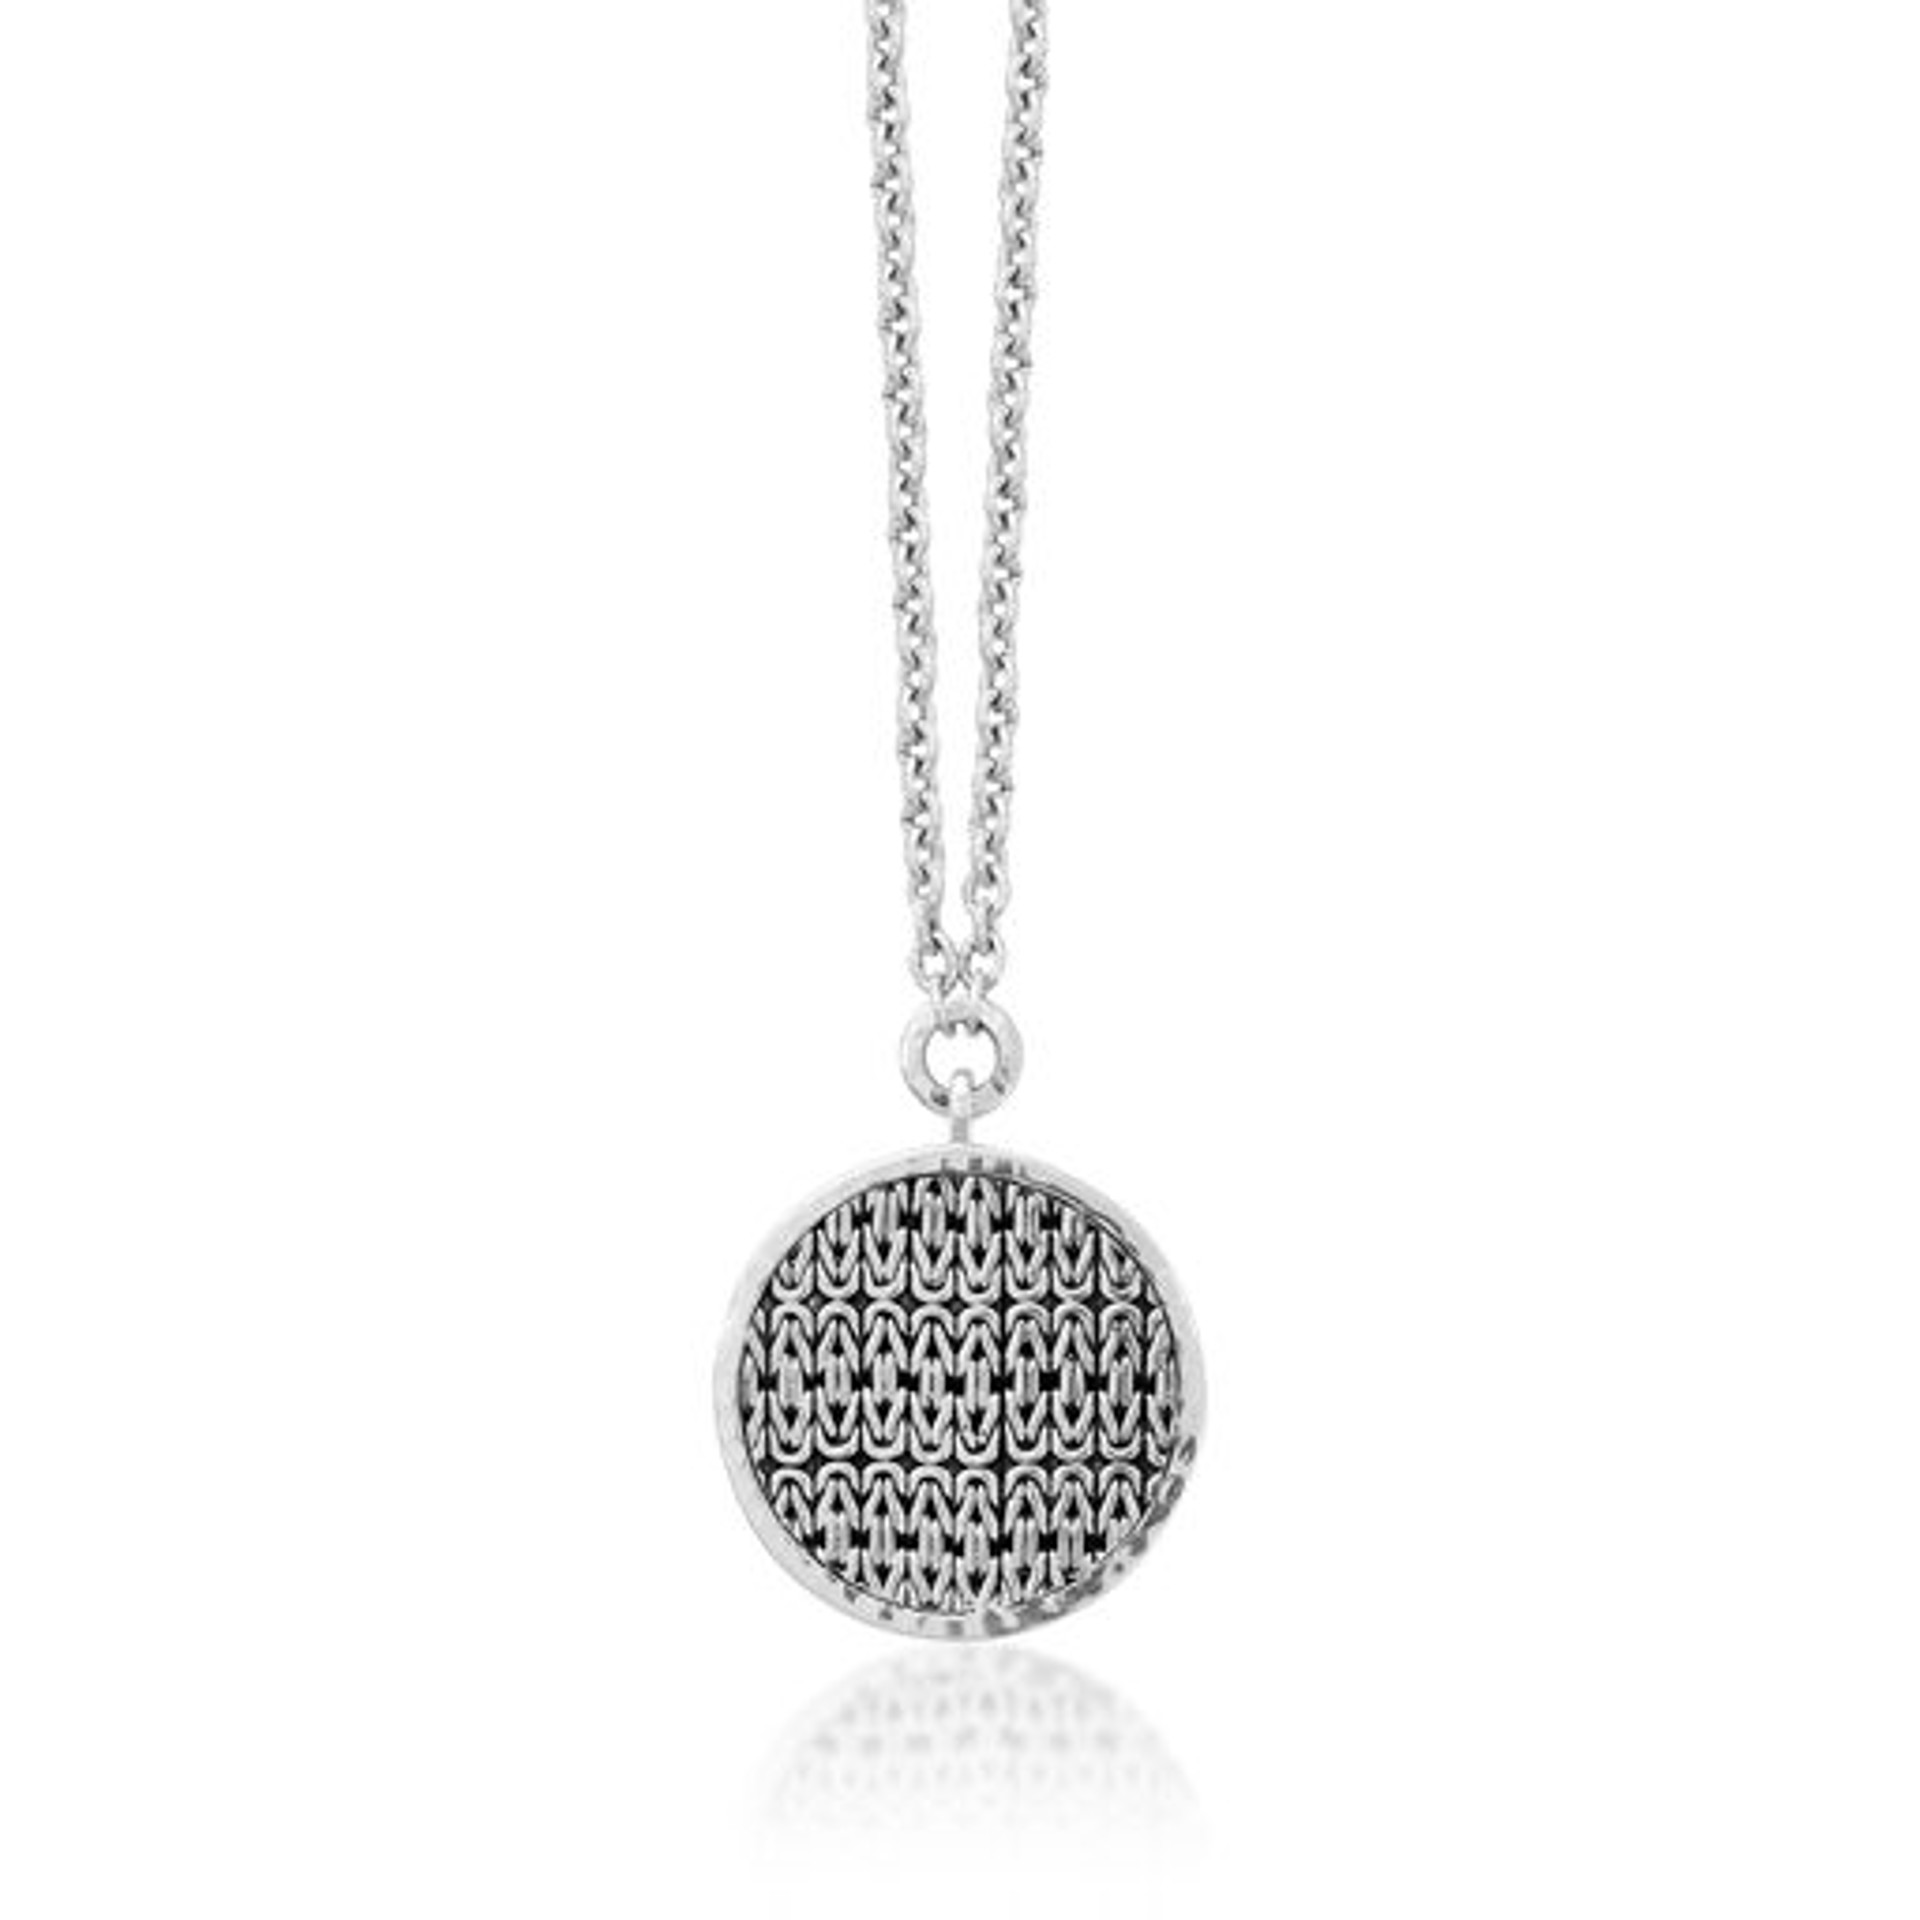 7031 Men's Silver Circle 1-sided Weave Necklace by Lois Hill